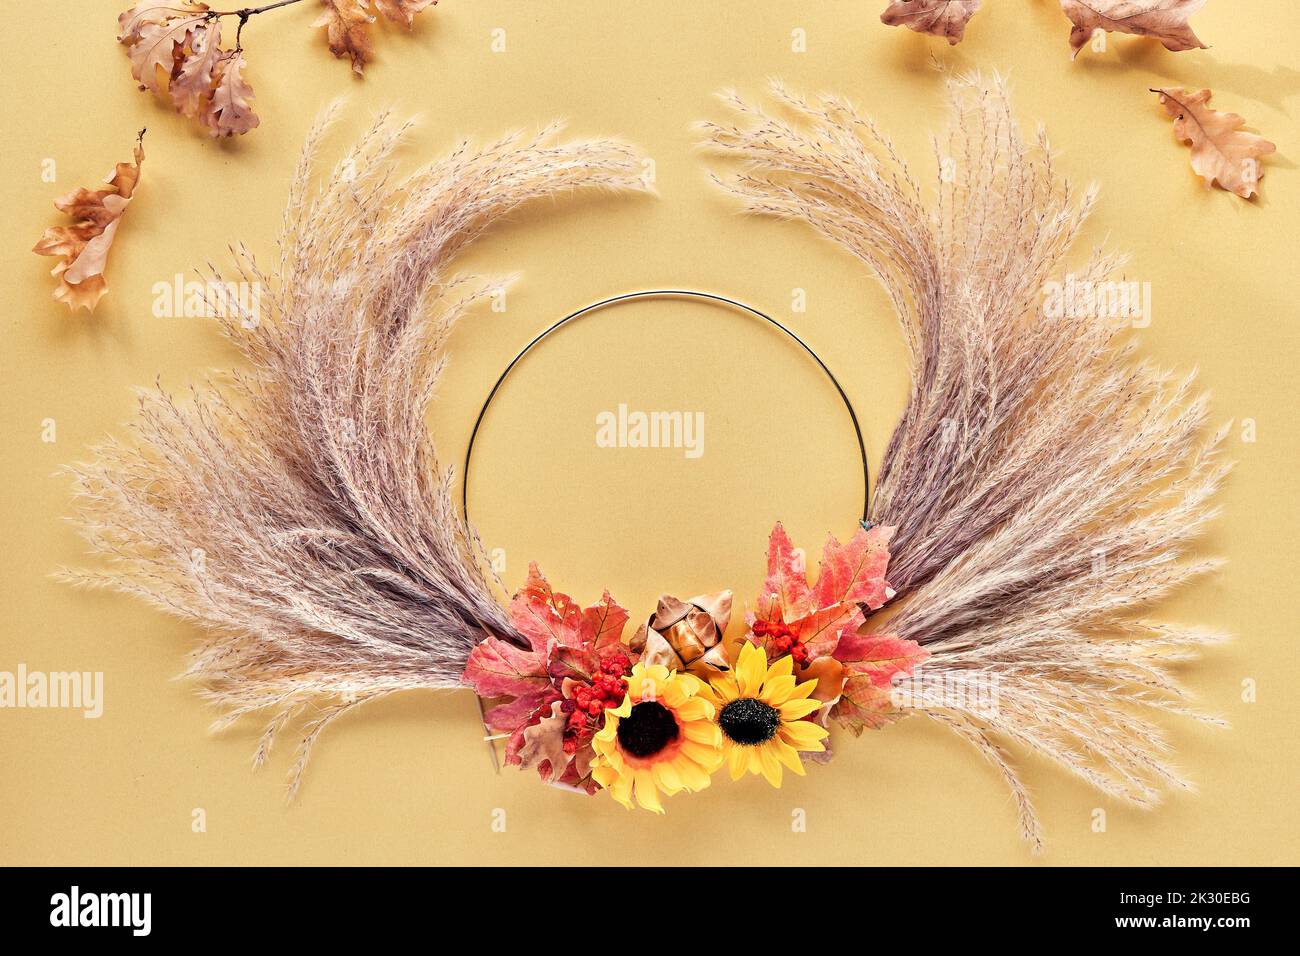 Hands making dried floral wreath from dry pampas grass and Autumn leaves. Flat lay on white yellow table, sunlight with long shadows. Stock Photo